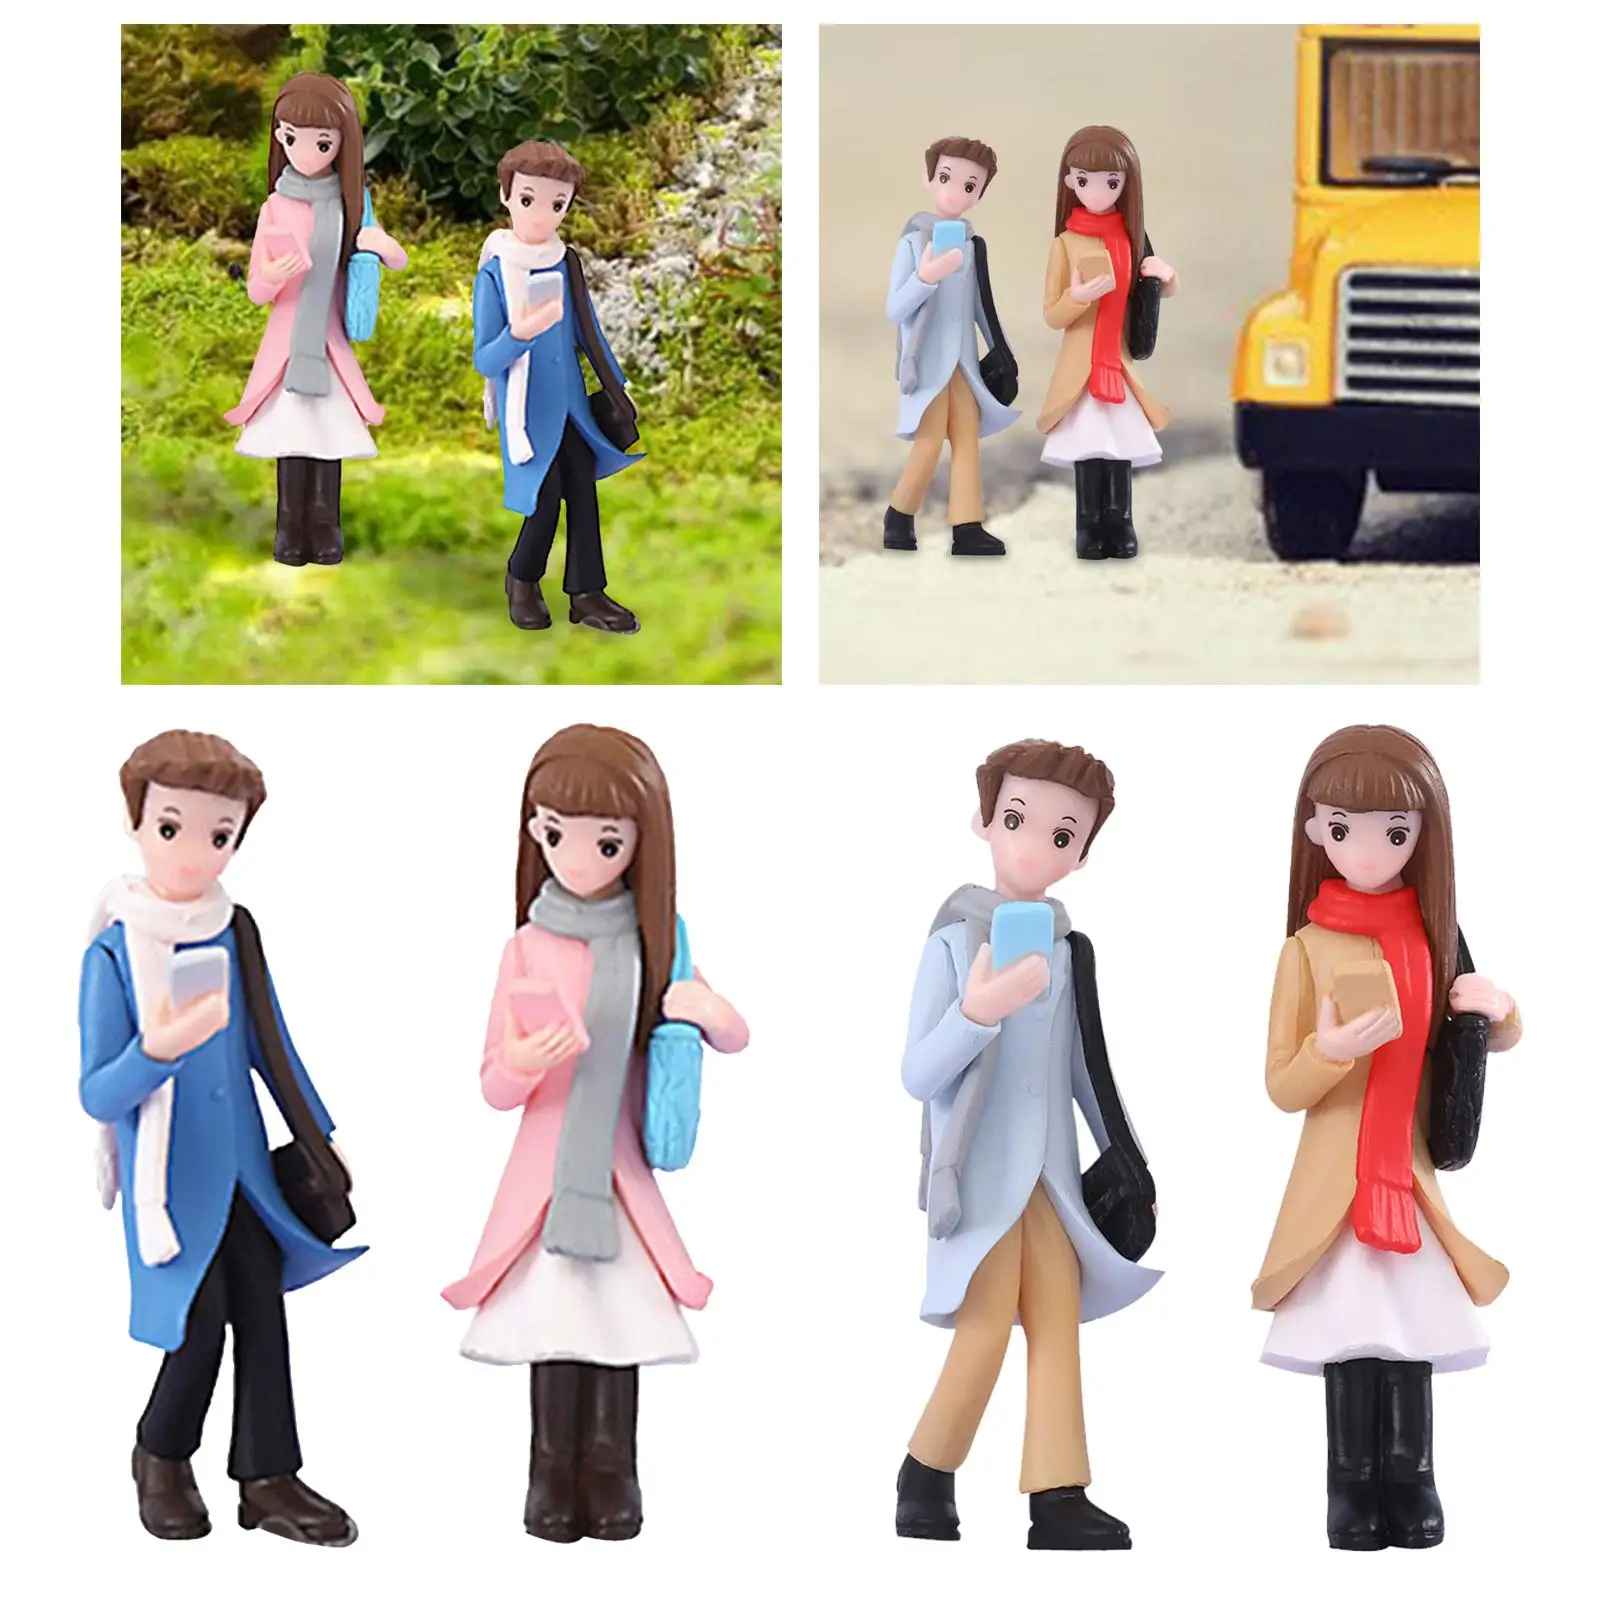 Phone Couple Diorama Street Character Figure Hand Painted People Model for Photography Props Dollhouse DIY Scene Accessories